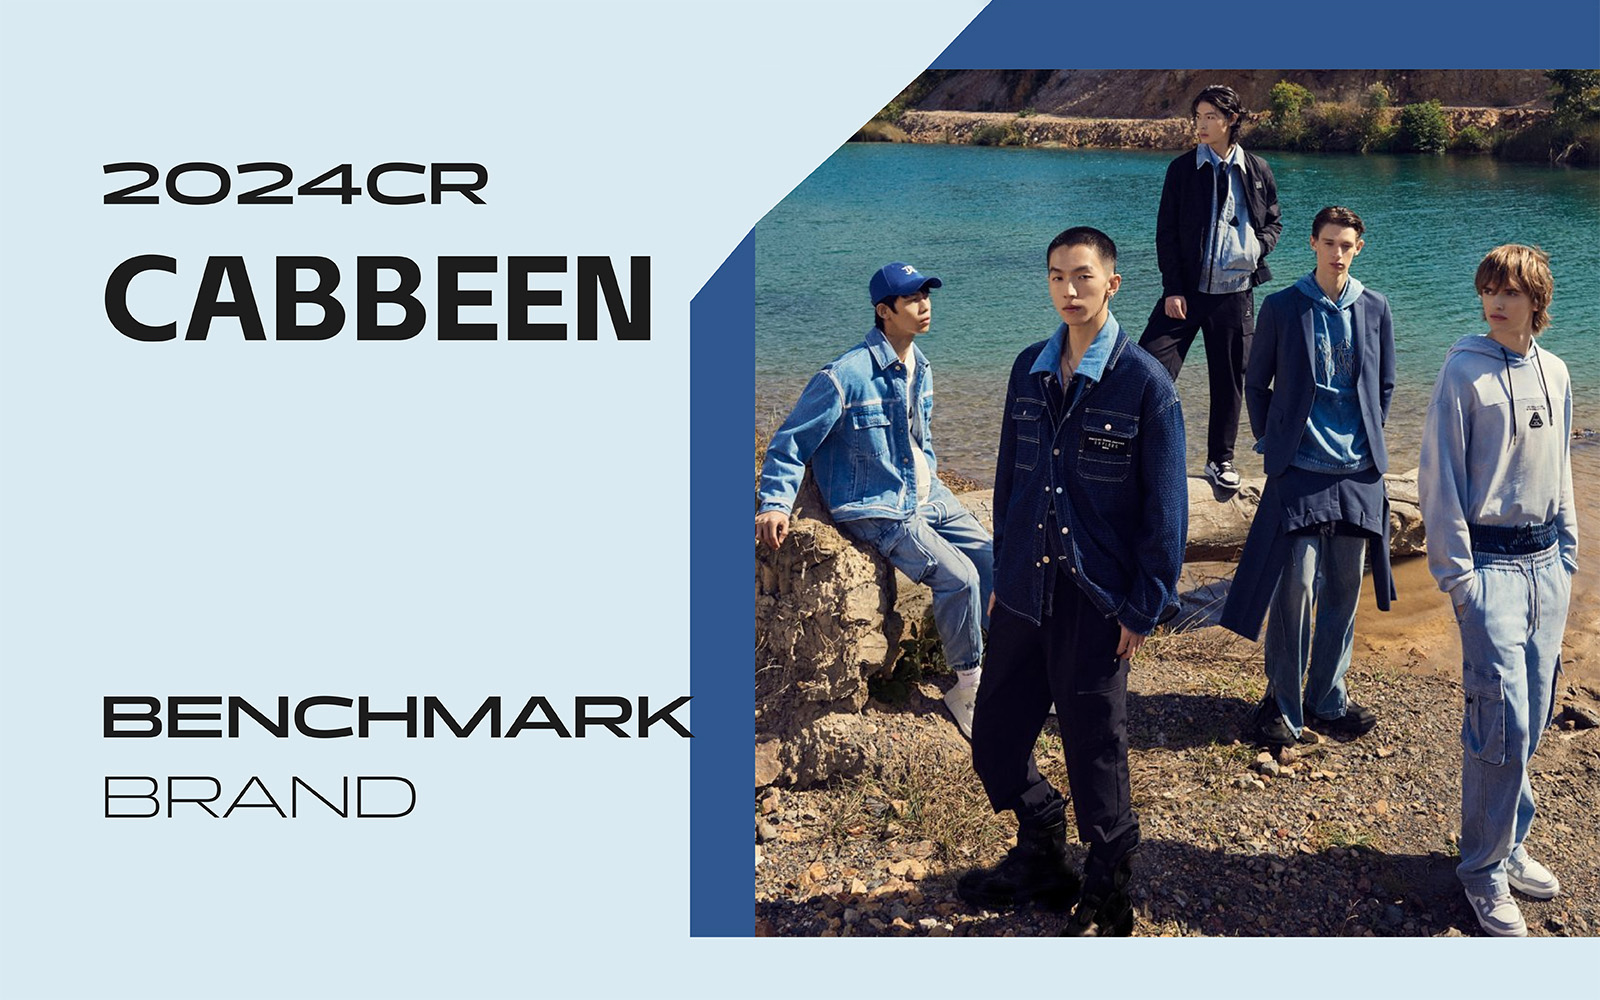 Natural Search -- The Analysis of Cabbeen The Menswear Benchmark Brand